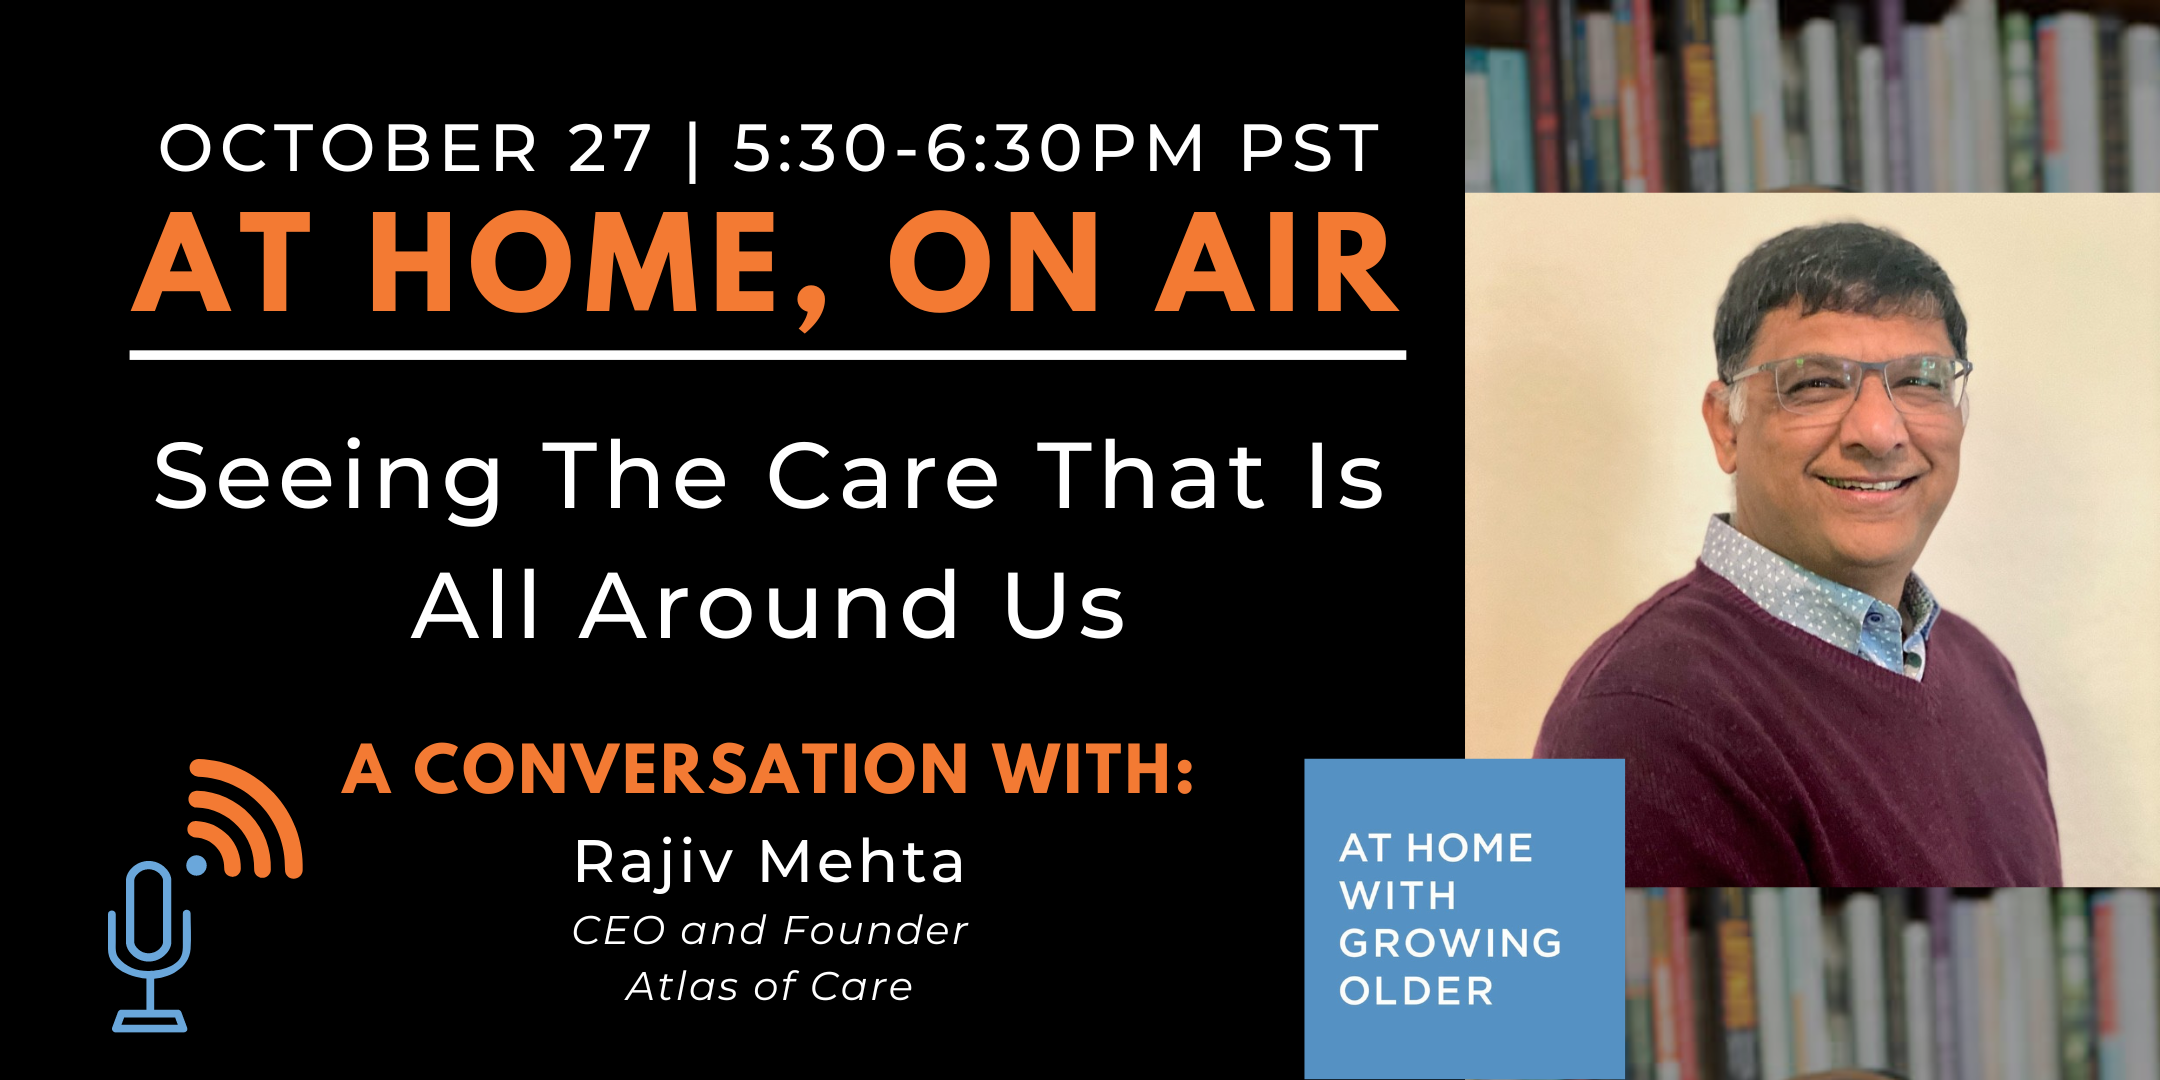 At Home, On Air: A Conversation with Rajiv Mehta